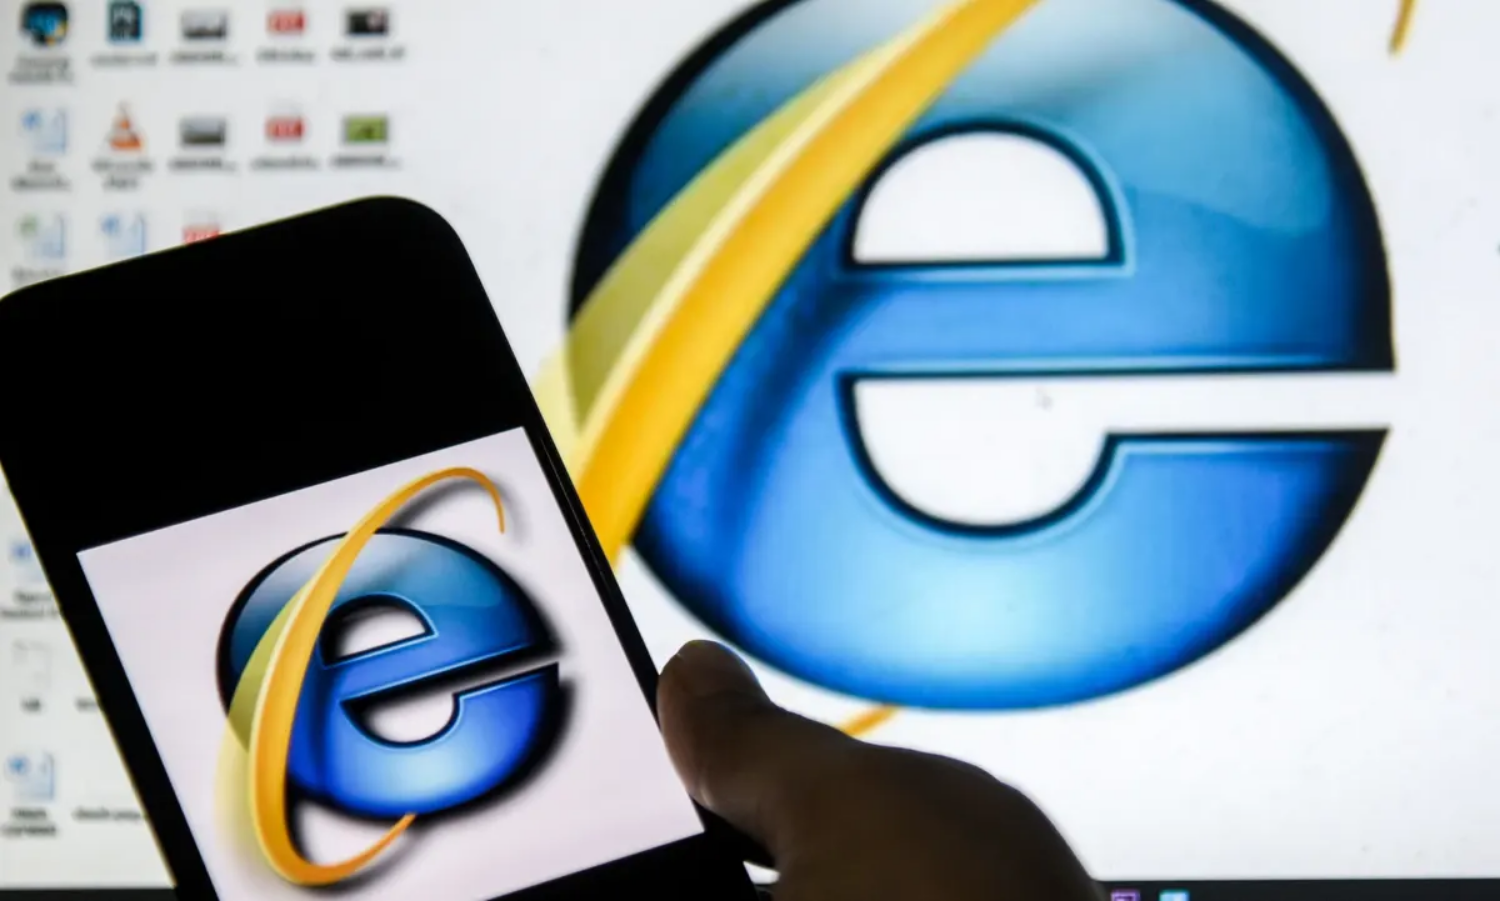 Microsoft to Phase Out Internet Explorer 11, Legacy Edge in 2021